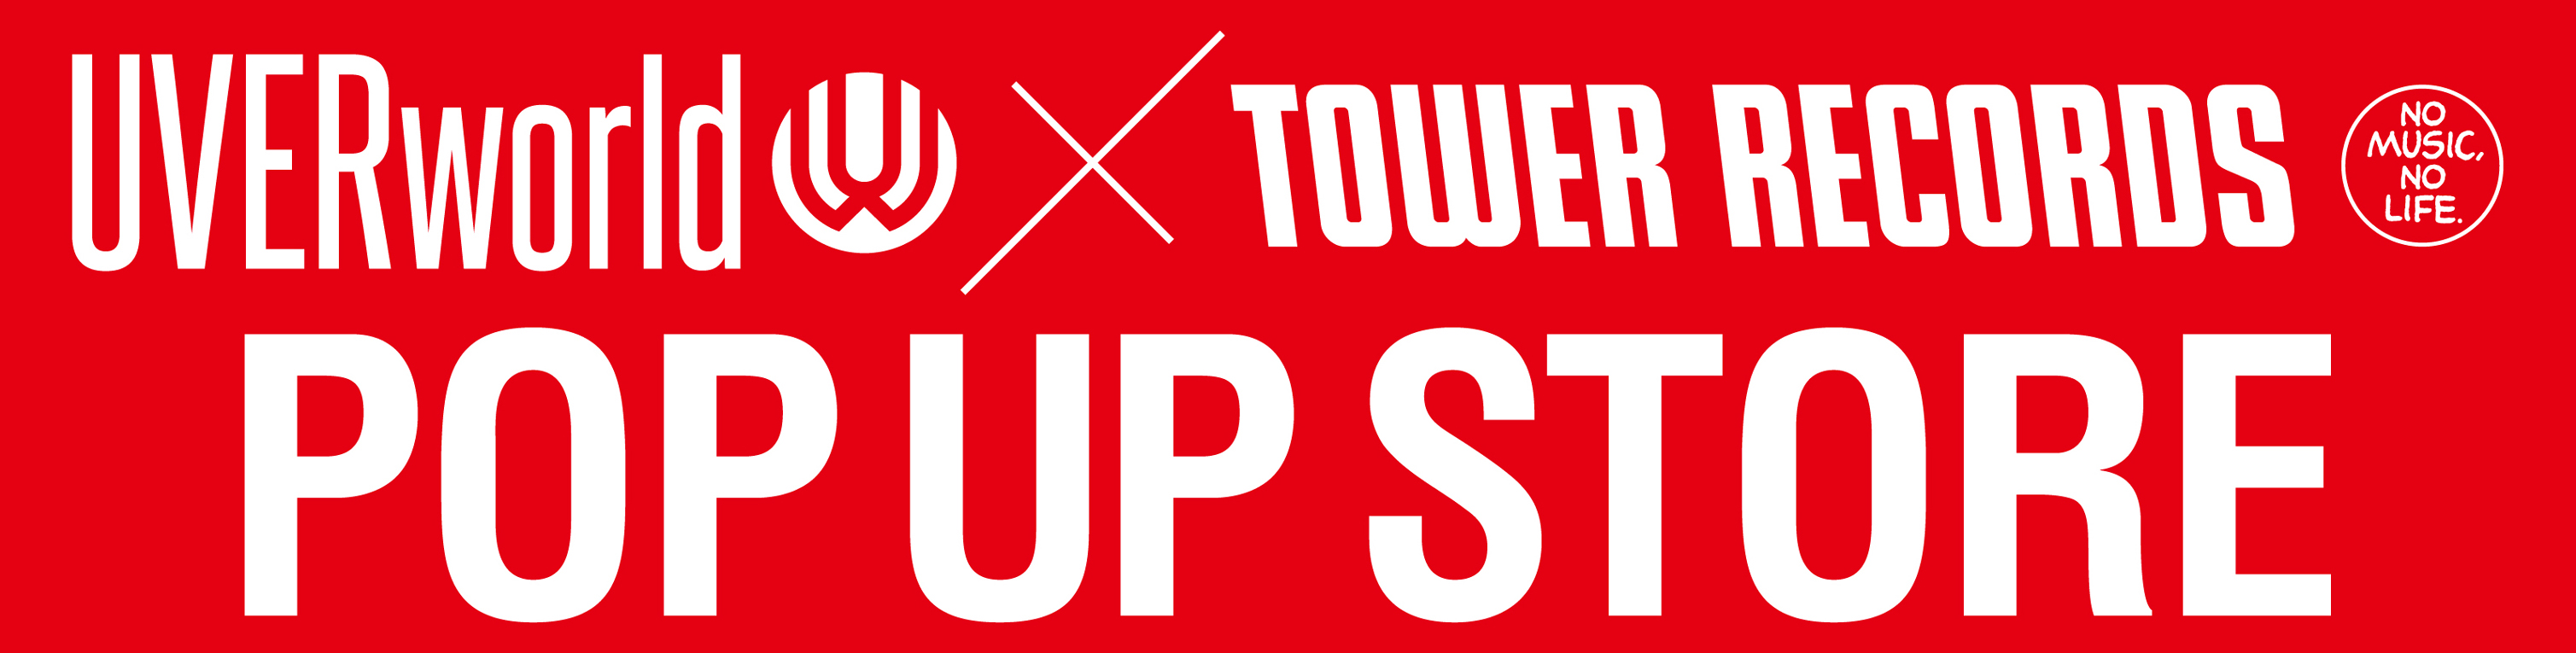 Uverworld Tower Records Pop Up Store が109men Sに期間限定